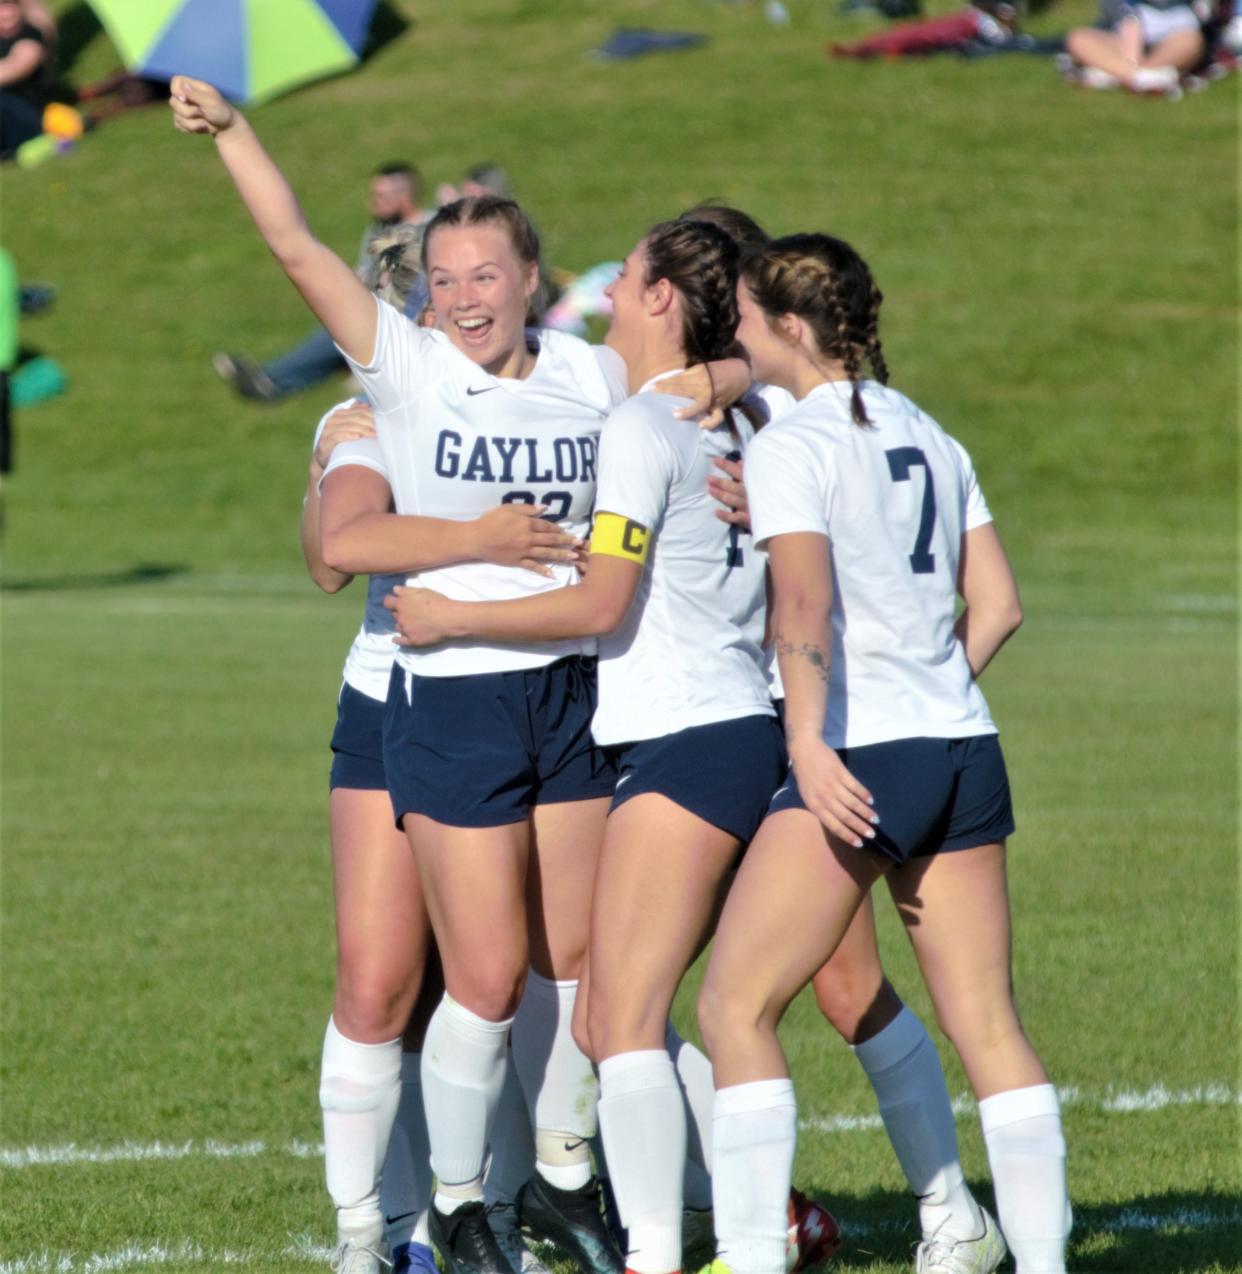 Gaylord celebrates Clarie Gorno's goal during a high school soccer MHSAA district quarterfinal matchup between Gaylord and Cadillac on Thursday, May 25, 2023 in Cadillac, Mich.